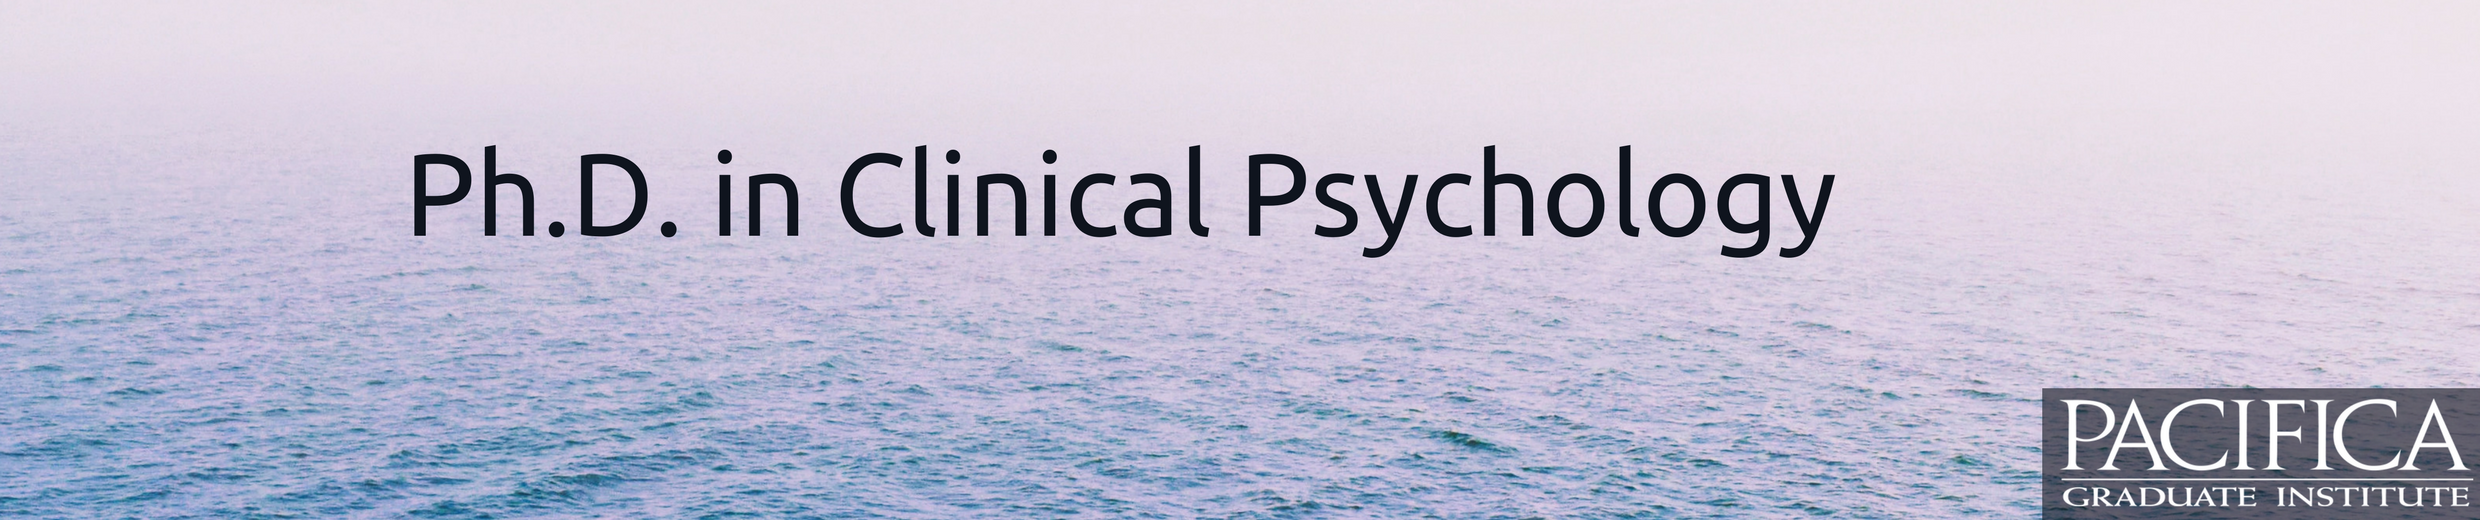 Ph.D. in Clinical Psychology